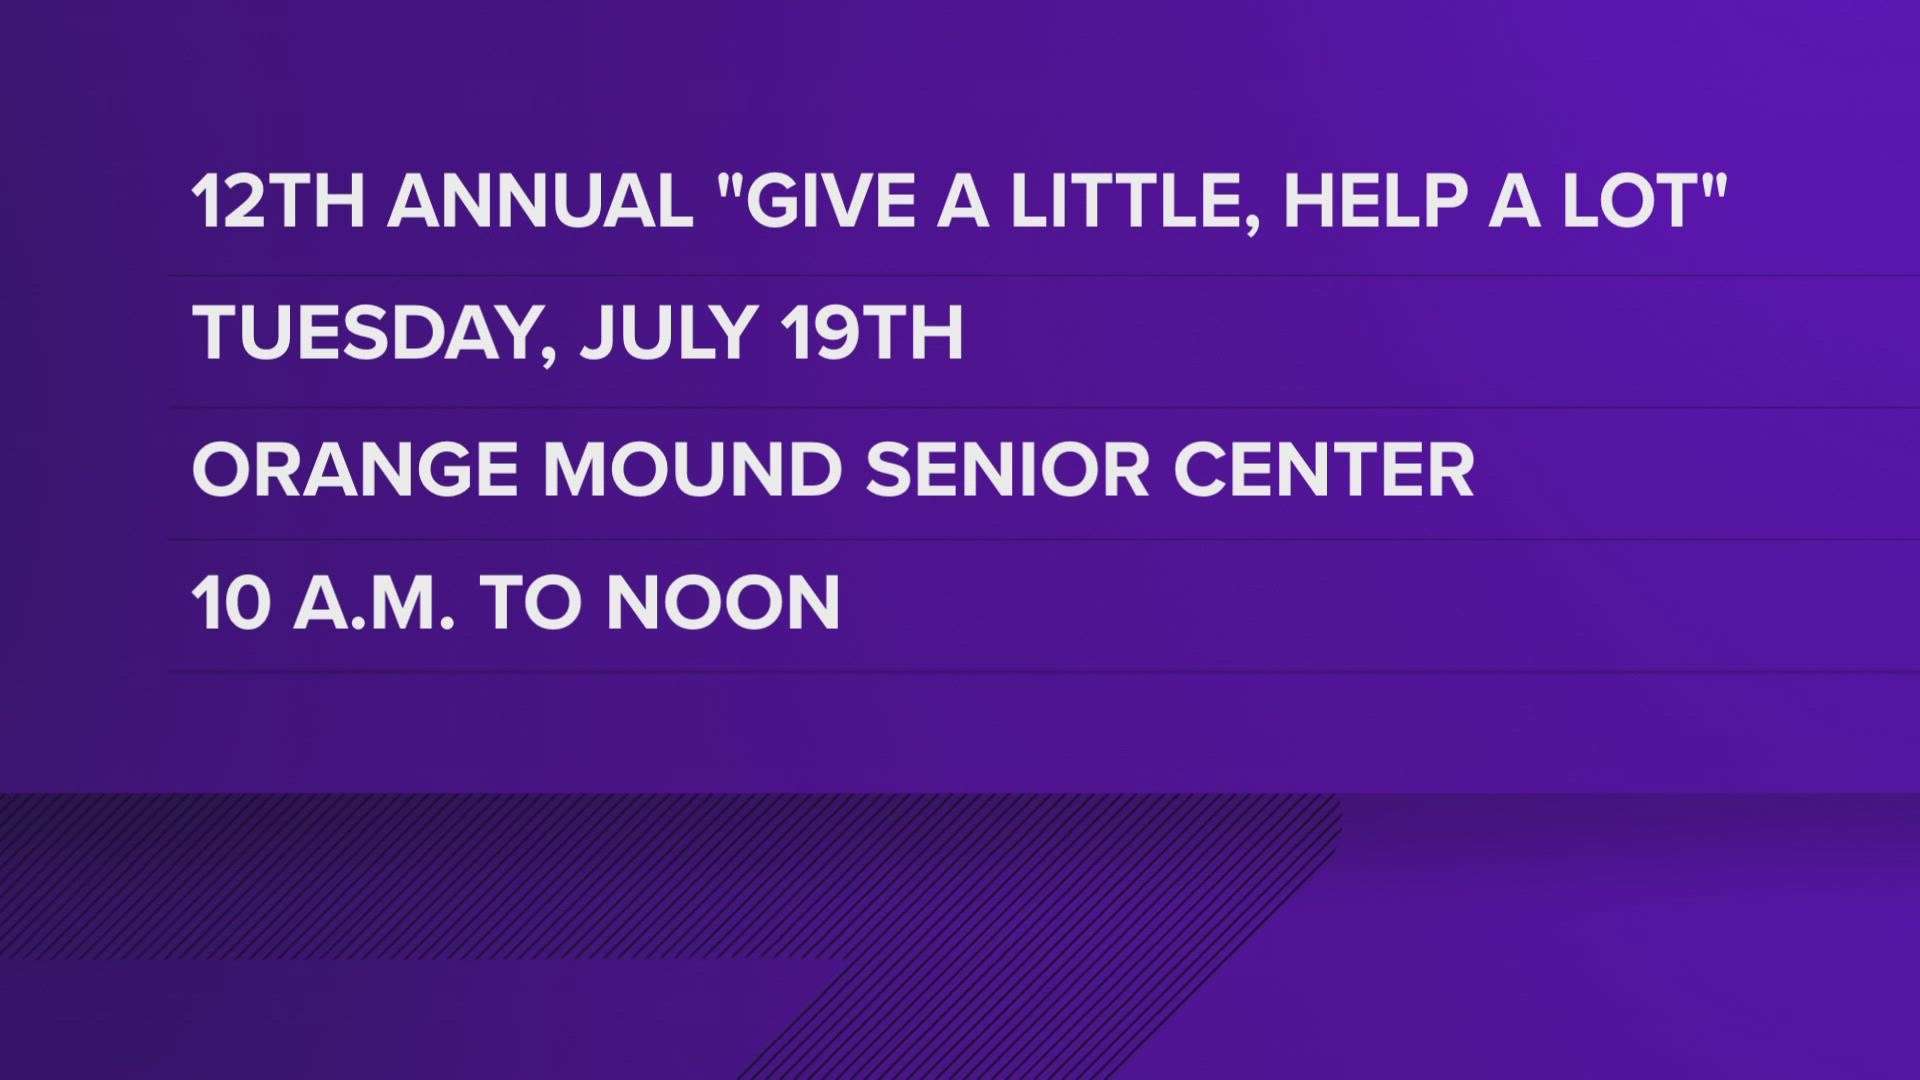 The 12th annual "Give a Little, Help a Lot" legal aid clinic will take place from 10 a.m. to noon at the Orange Mound Senior Center on July 19.